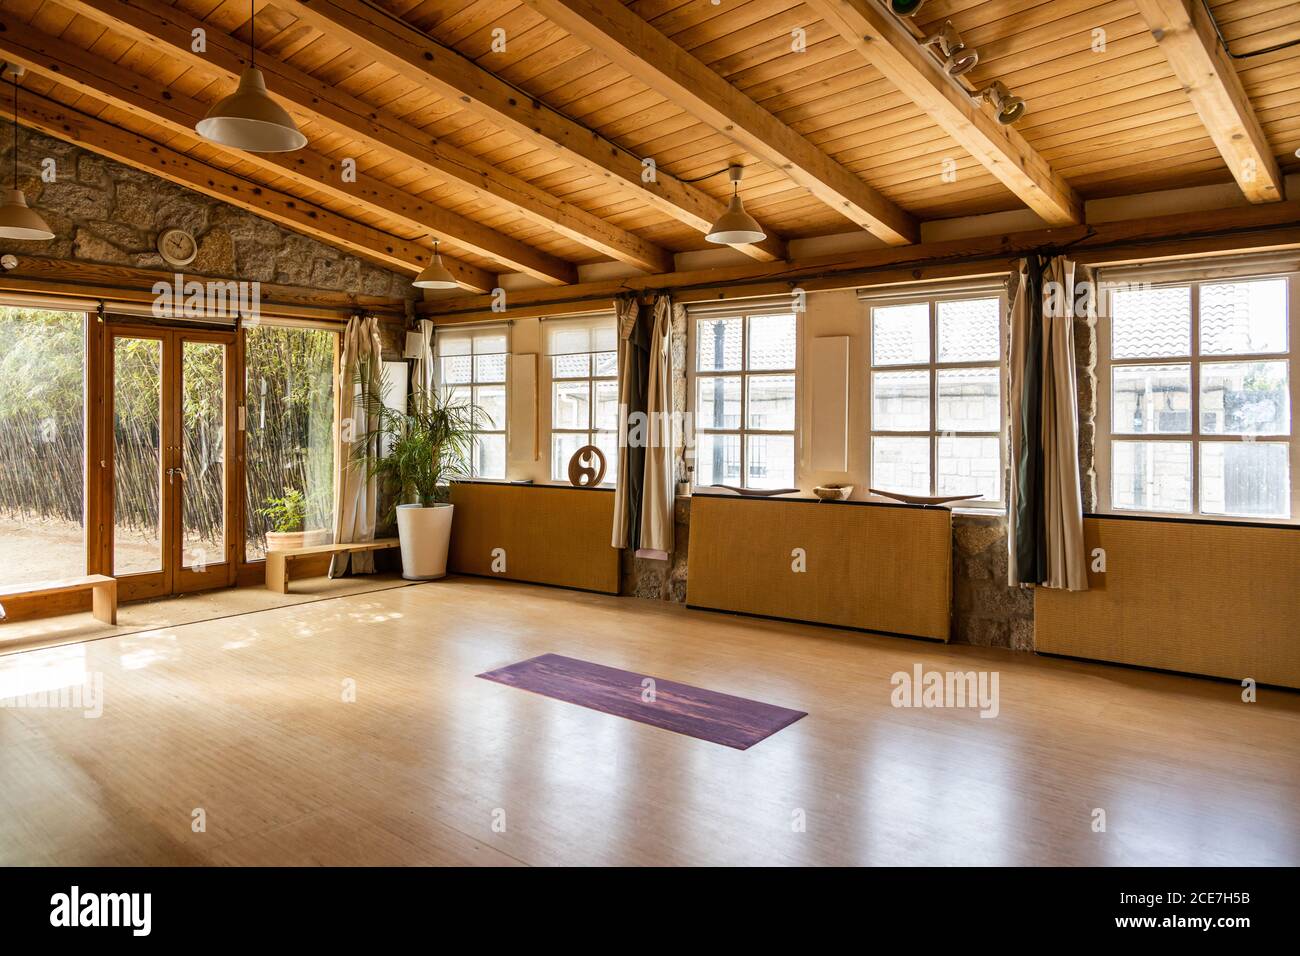 Yoga mat placed on wooden floor inside spacious pavilion decorated in oriental style located in tropical country Stock Photo